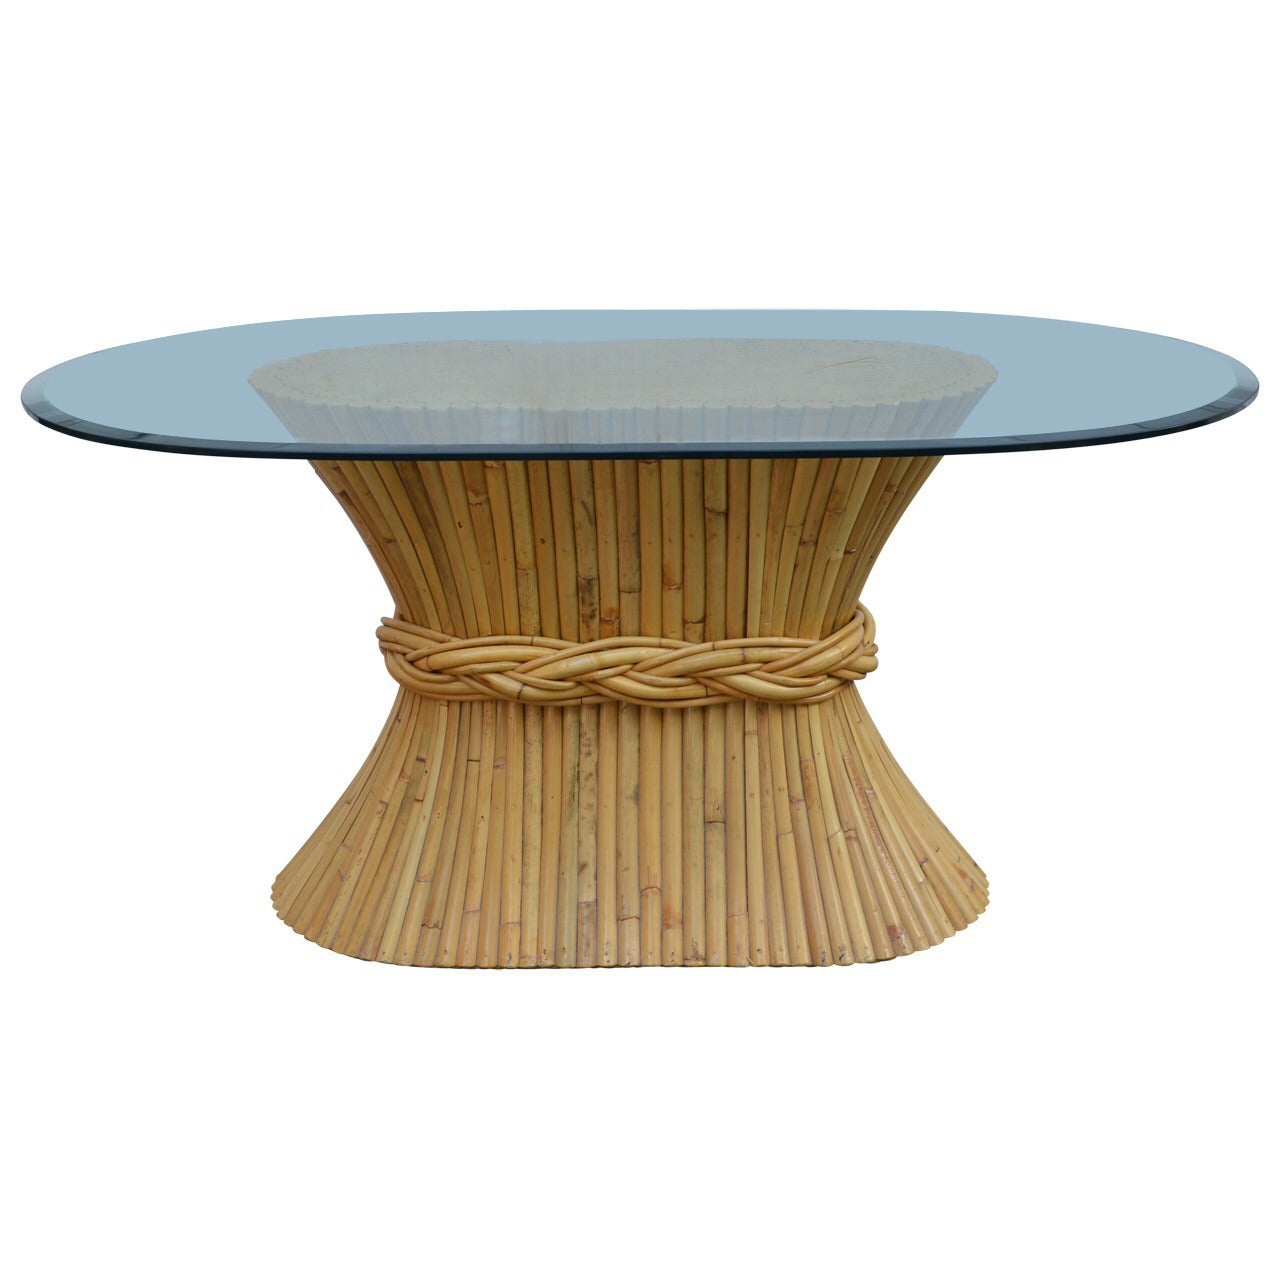 Midcentury Sheaf of Wheat Dining Table by McGuire